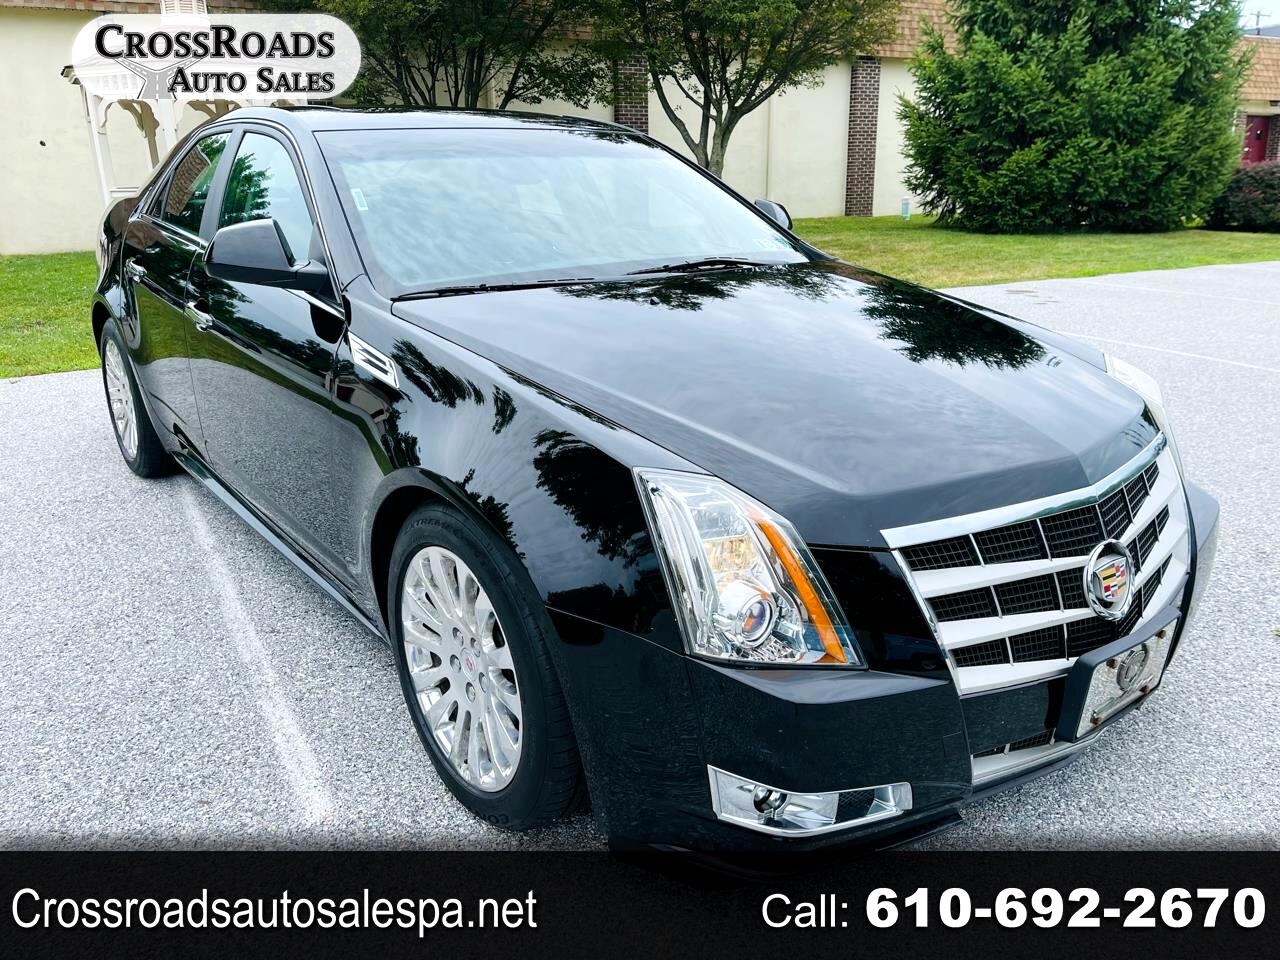 Used Cadillac Cts Sedan West Chester Pa